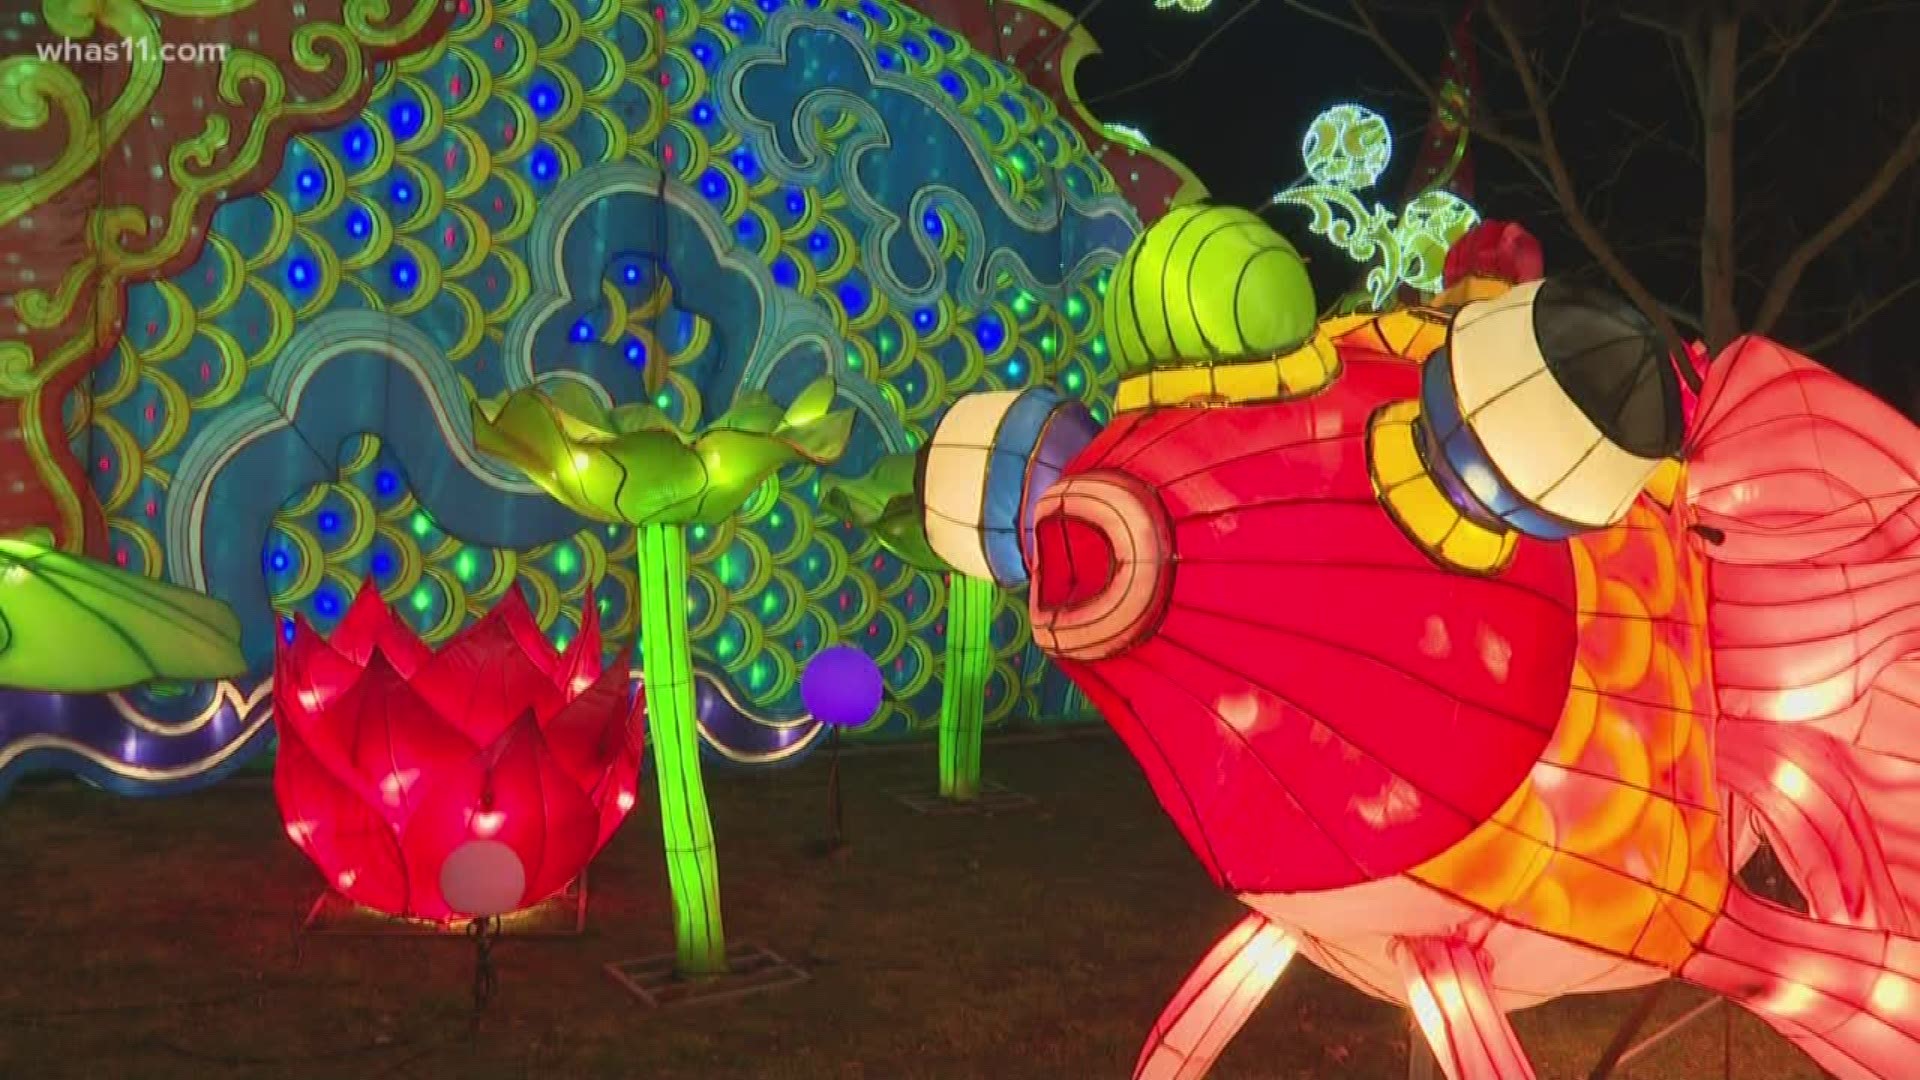 &#39;A feast for the eyes&#39; | Louisville Zoo lantern festival opens to the public | www.paulmartinsmith.com